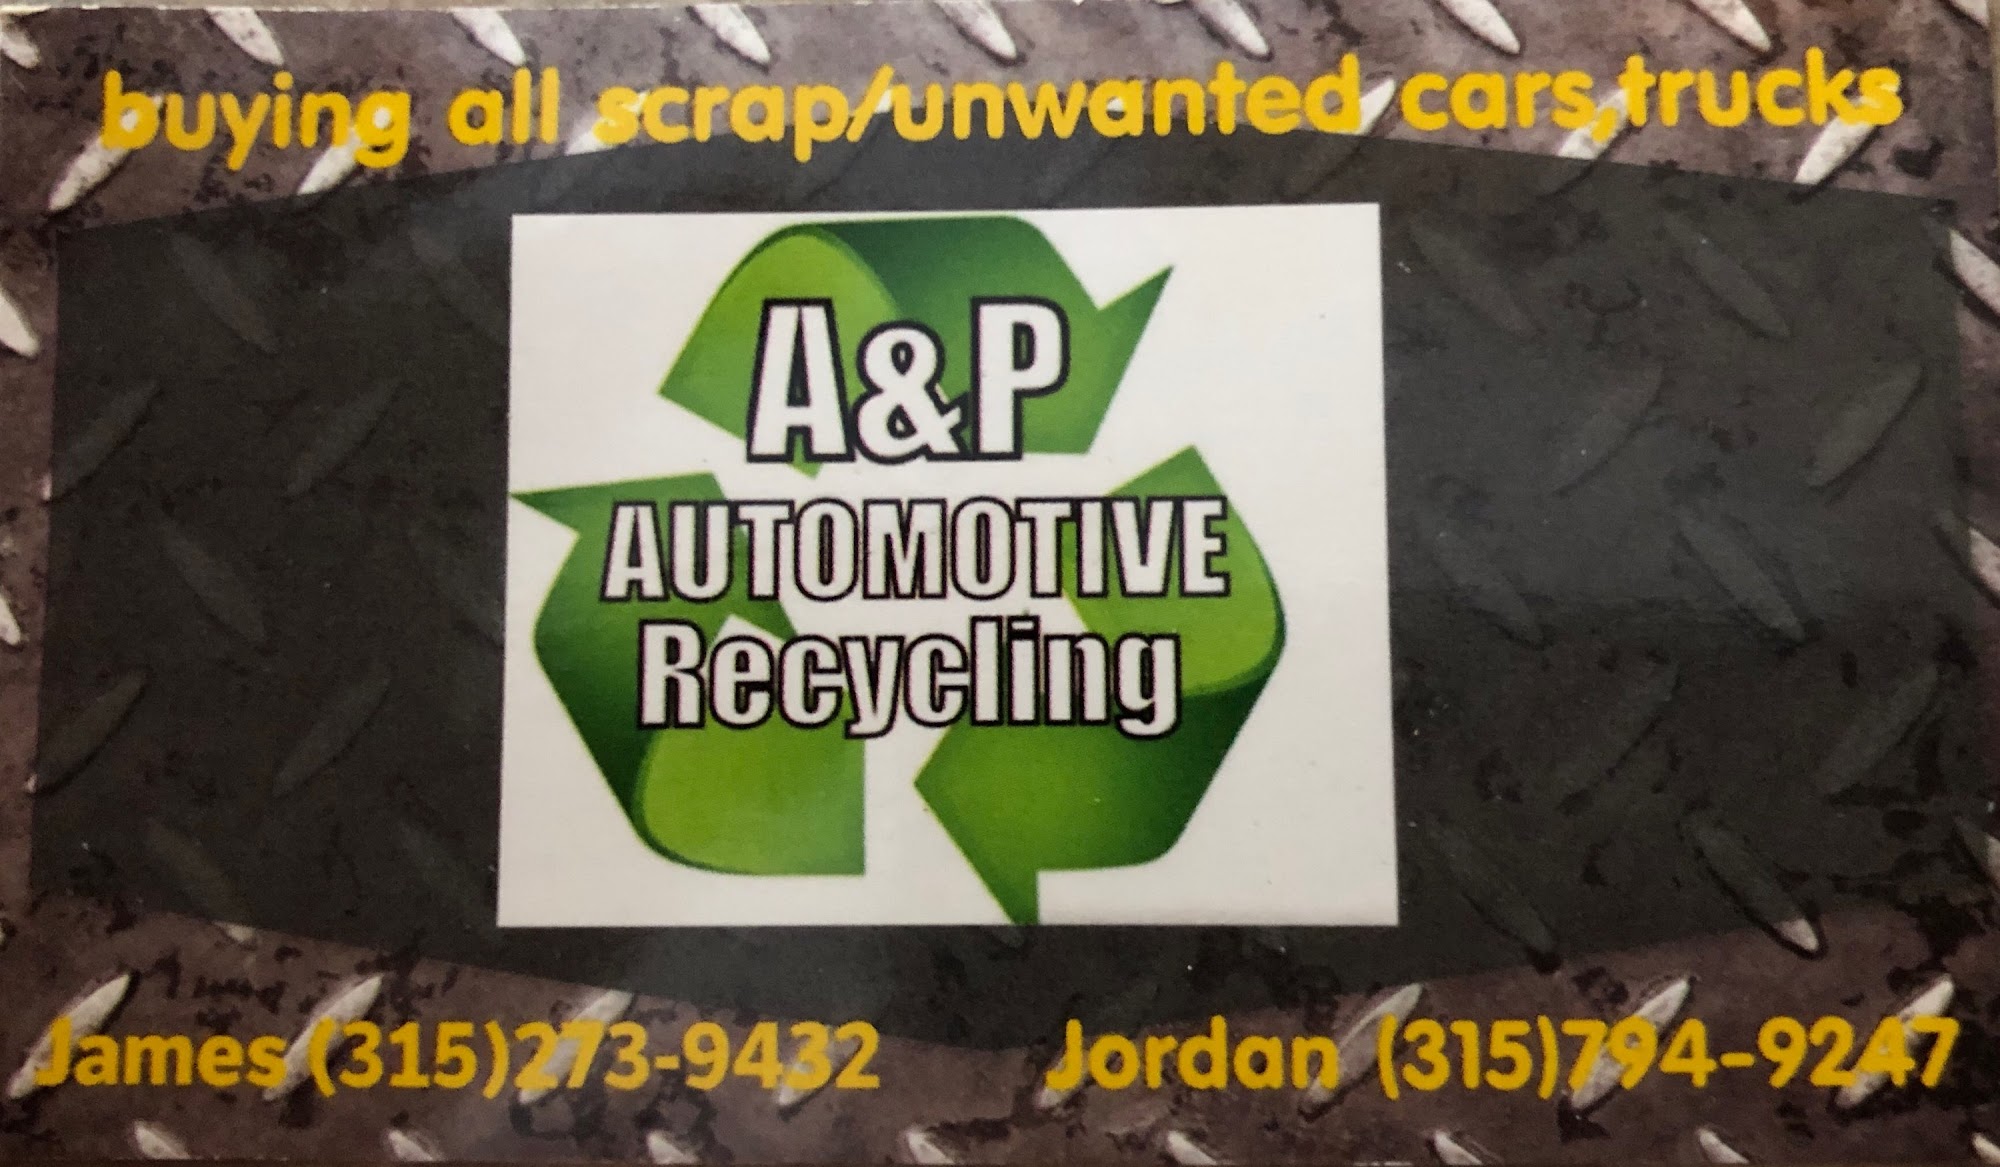 A&P Automotive Recycling & Towing